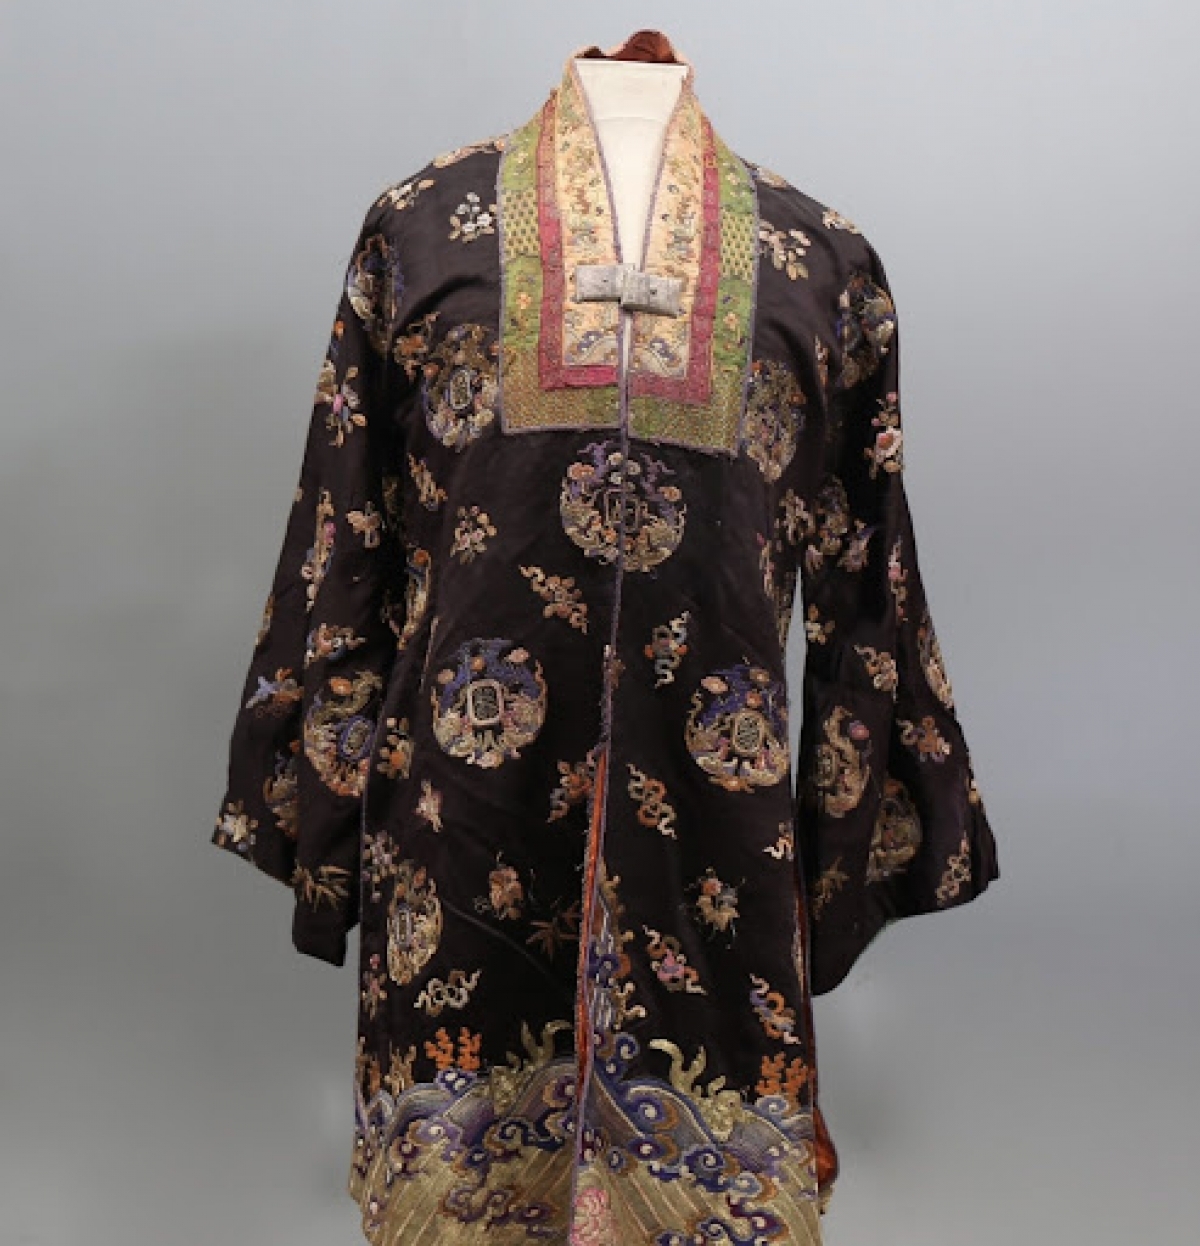 The Nhat Binh dress for empress dowager, empress consort, and princesses of the Nguyen Dynasty.